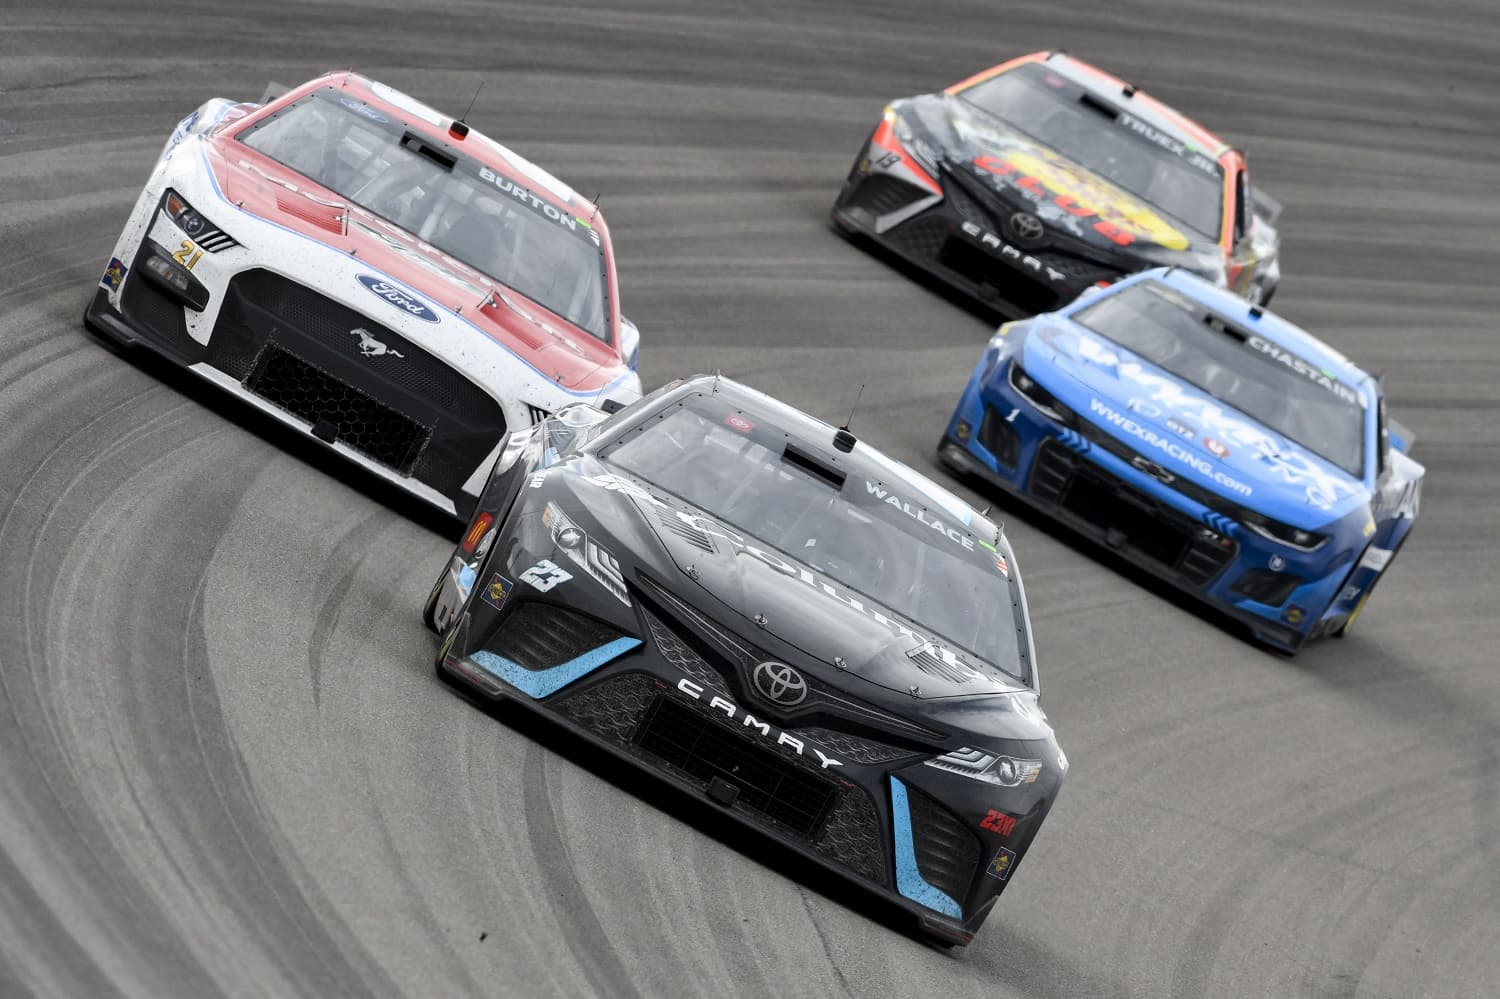 Bubba Wallace leads Harrison Burton, Ross Chastain, and Martin Truex Jr during the NASCAR Cup Series Pennzoil 400 on March 5, 2023, at Las Vegas Motor Speedway.